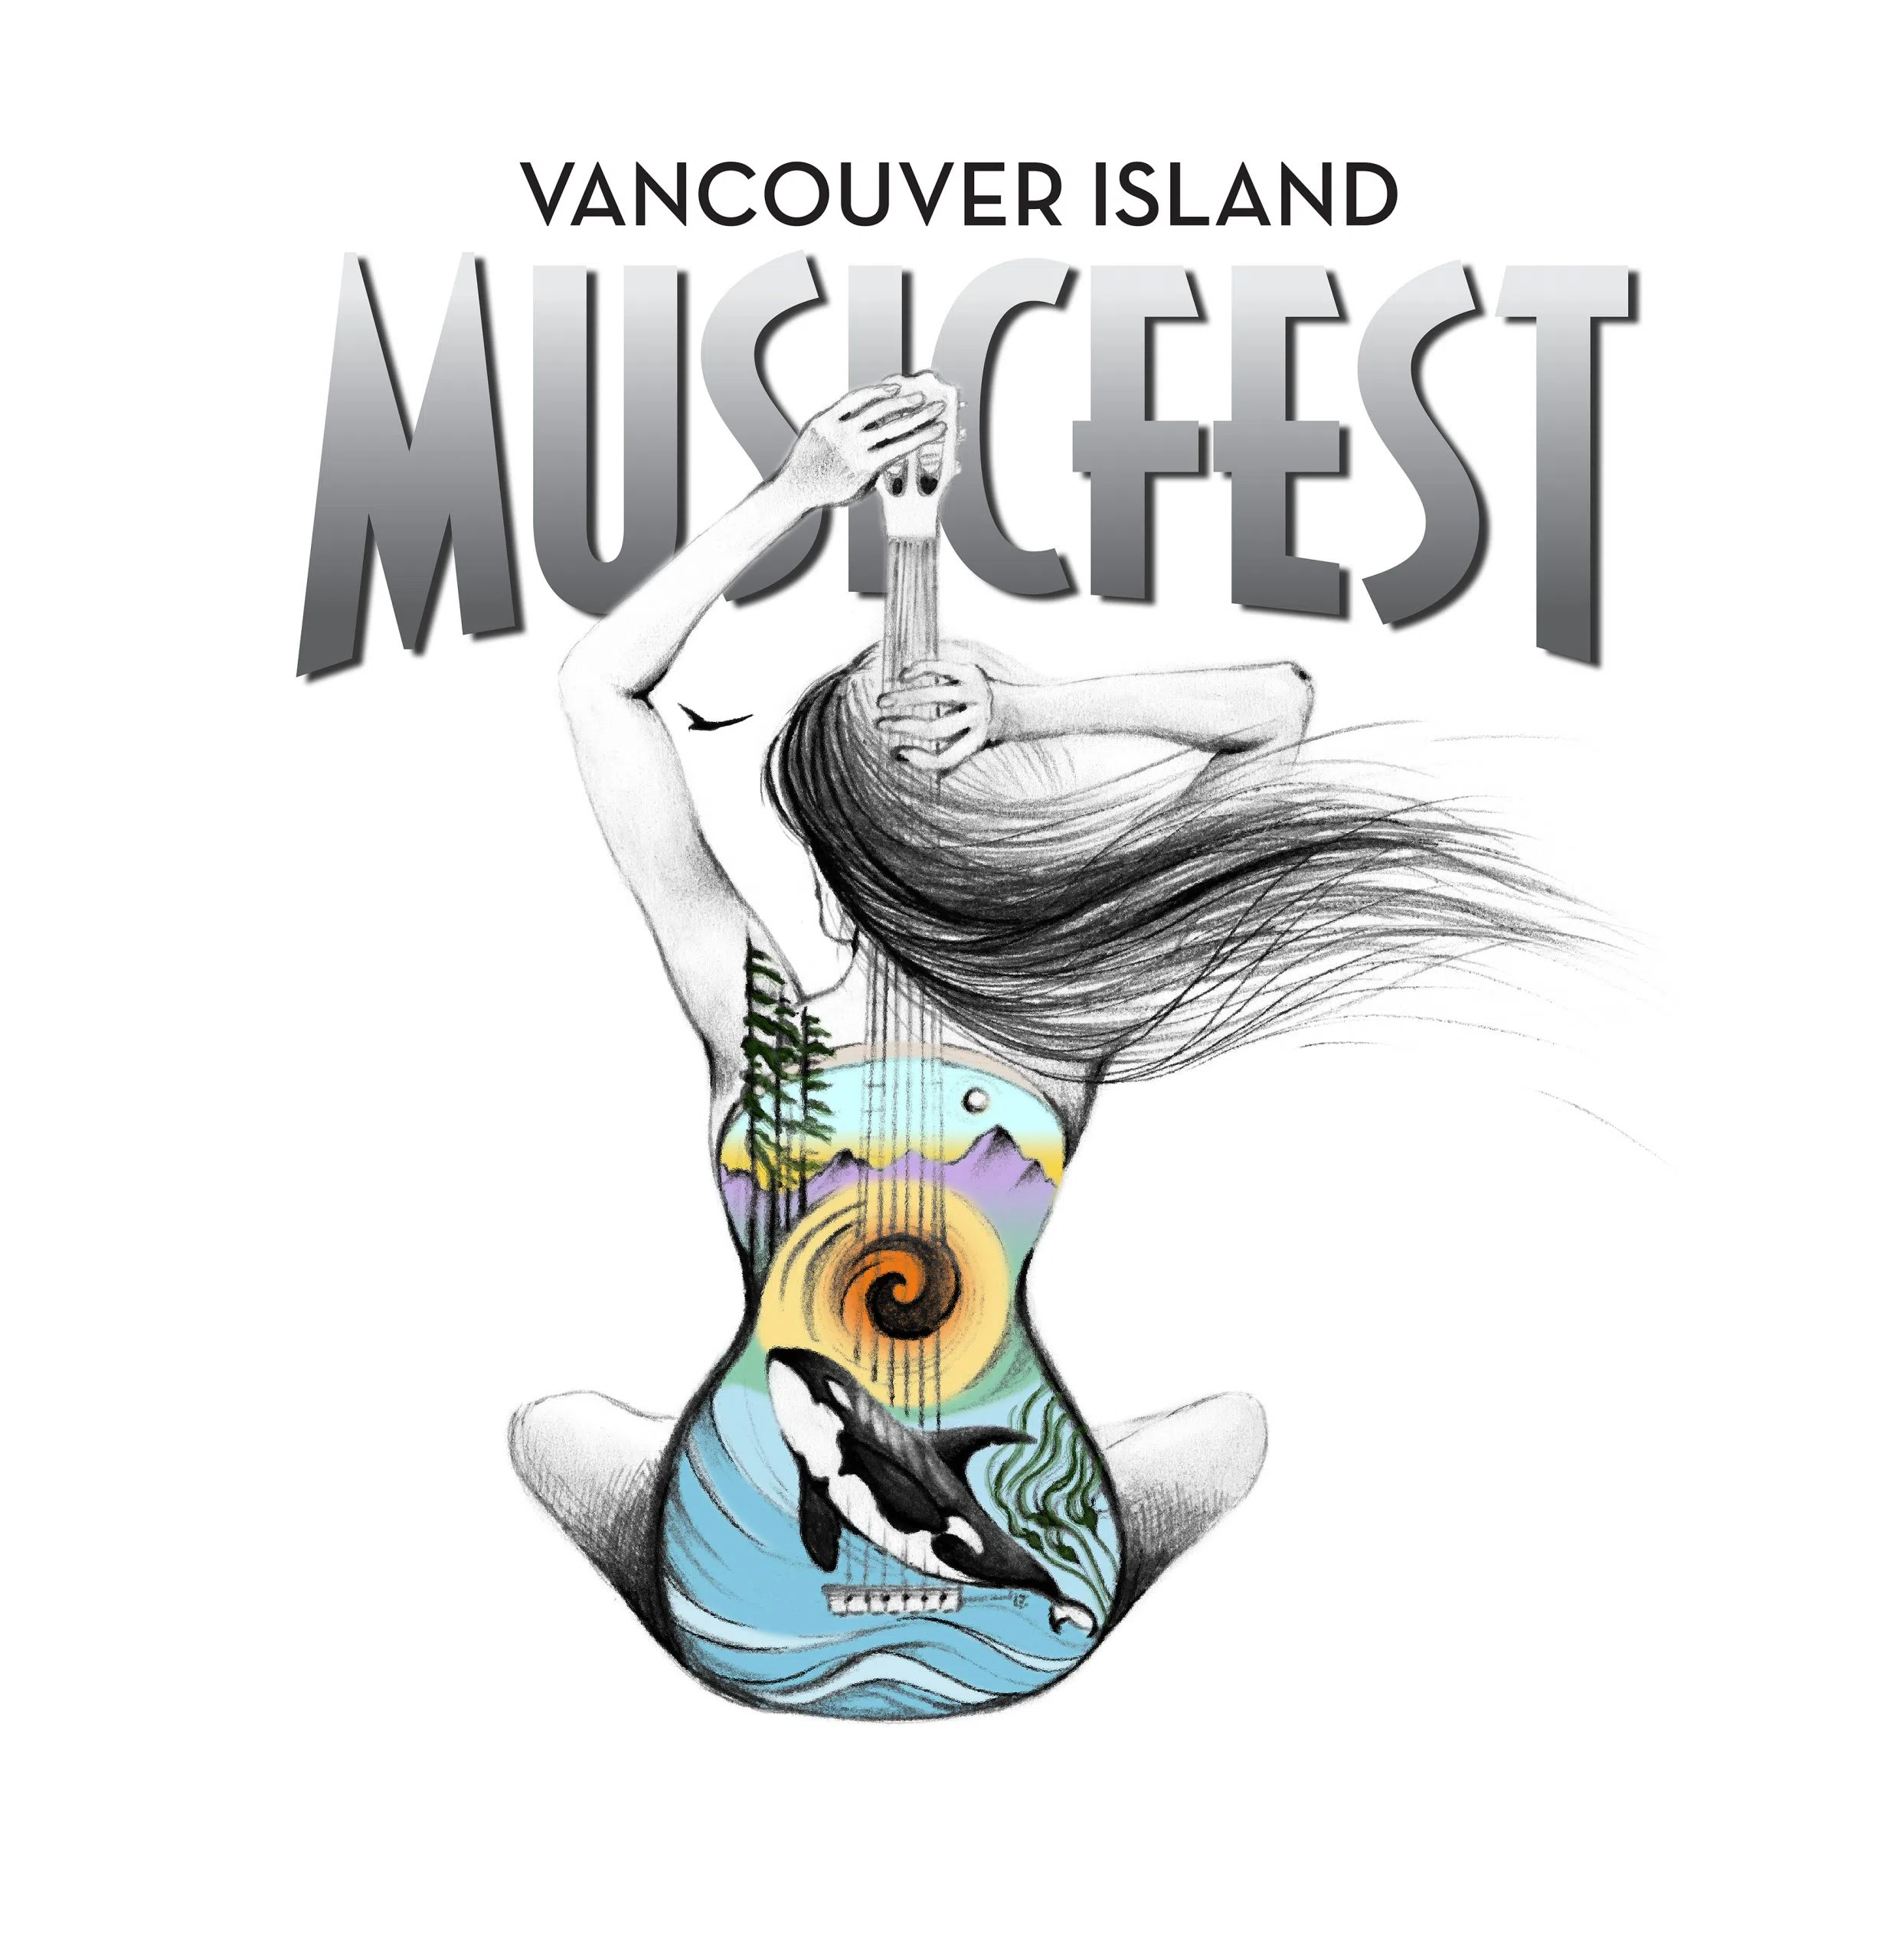 Vancouver Island MusicFest Poster Unveiled 97.3 The Eagle